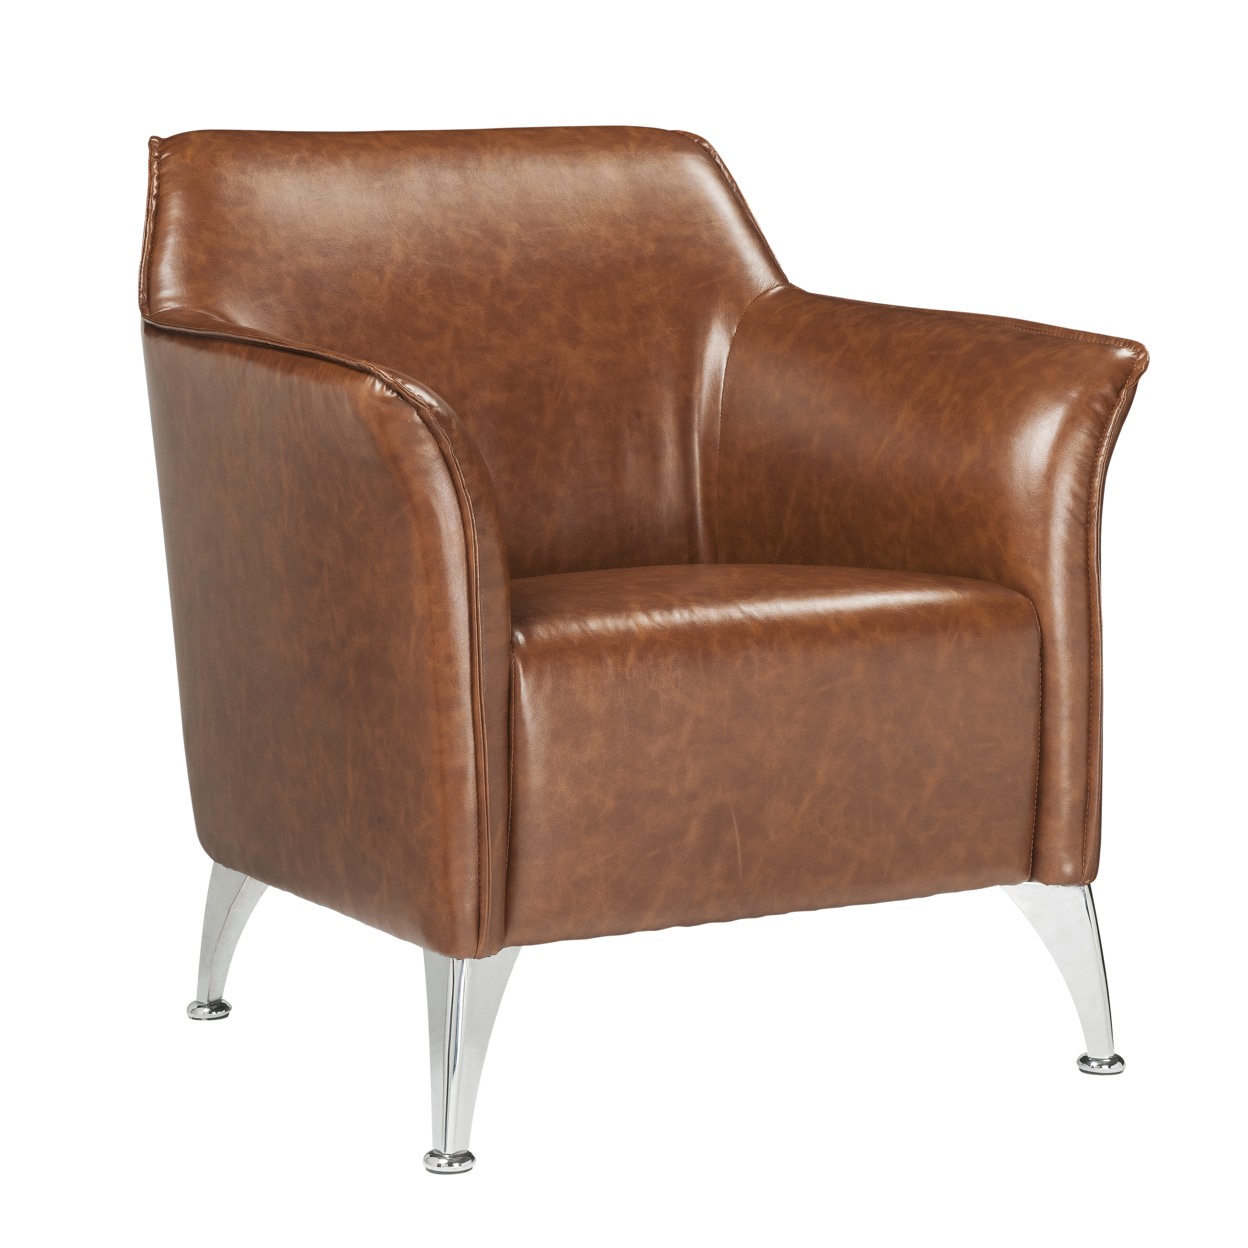 Leatherette Accent Chair With Track Armrest And Welt Trim Details, Brown- Saltoro Sherpi